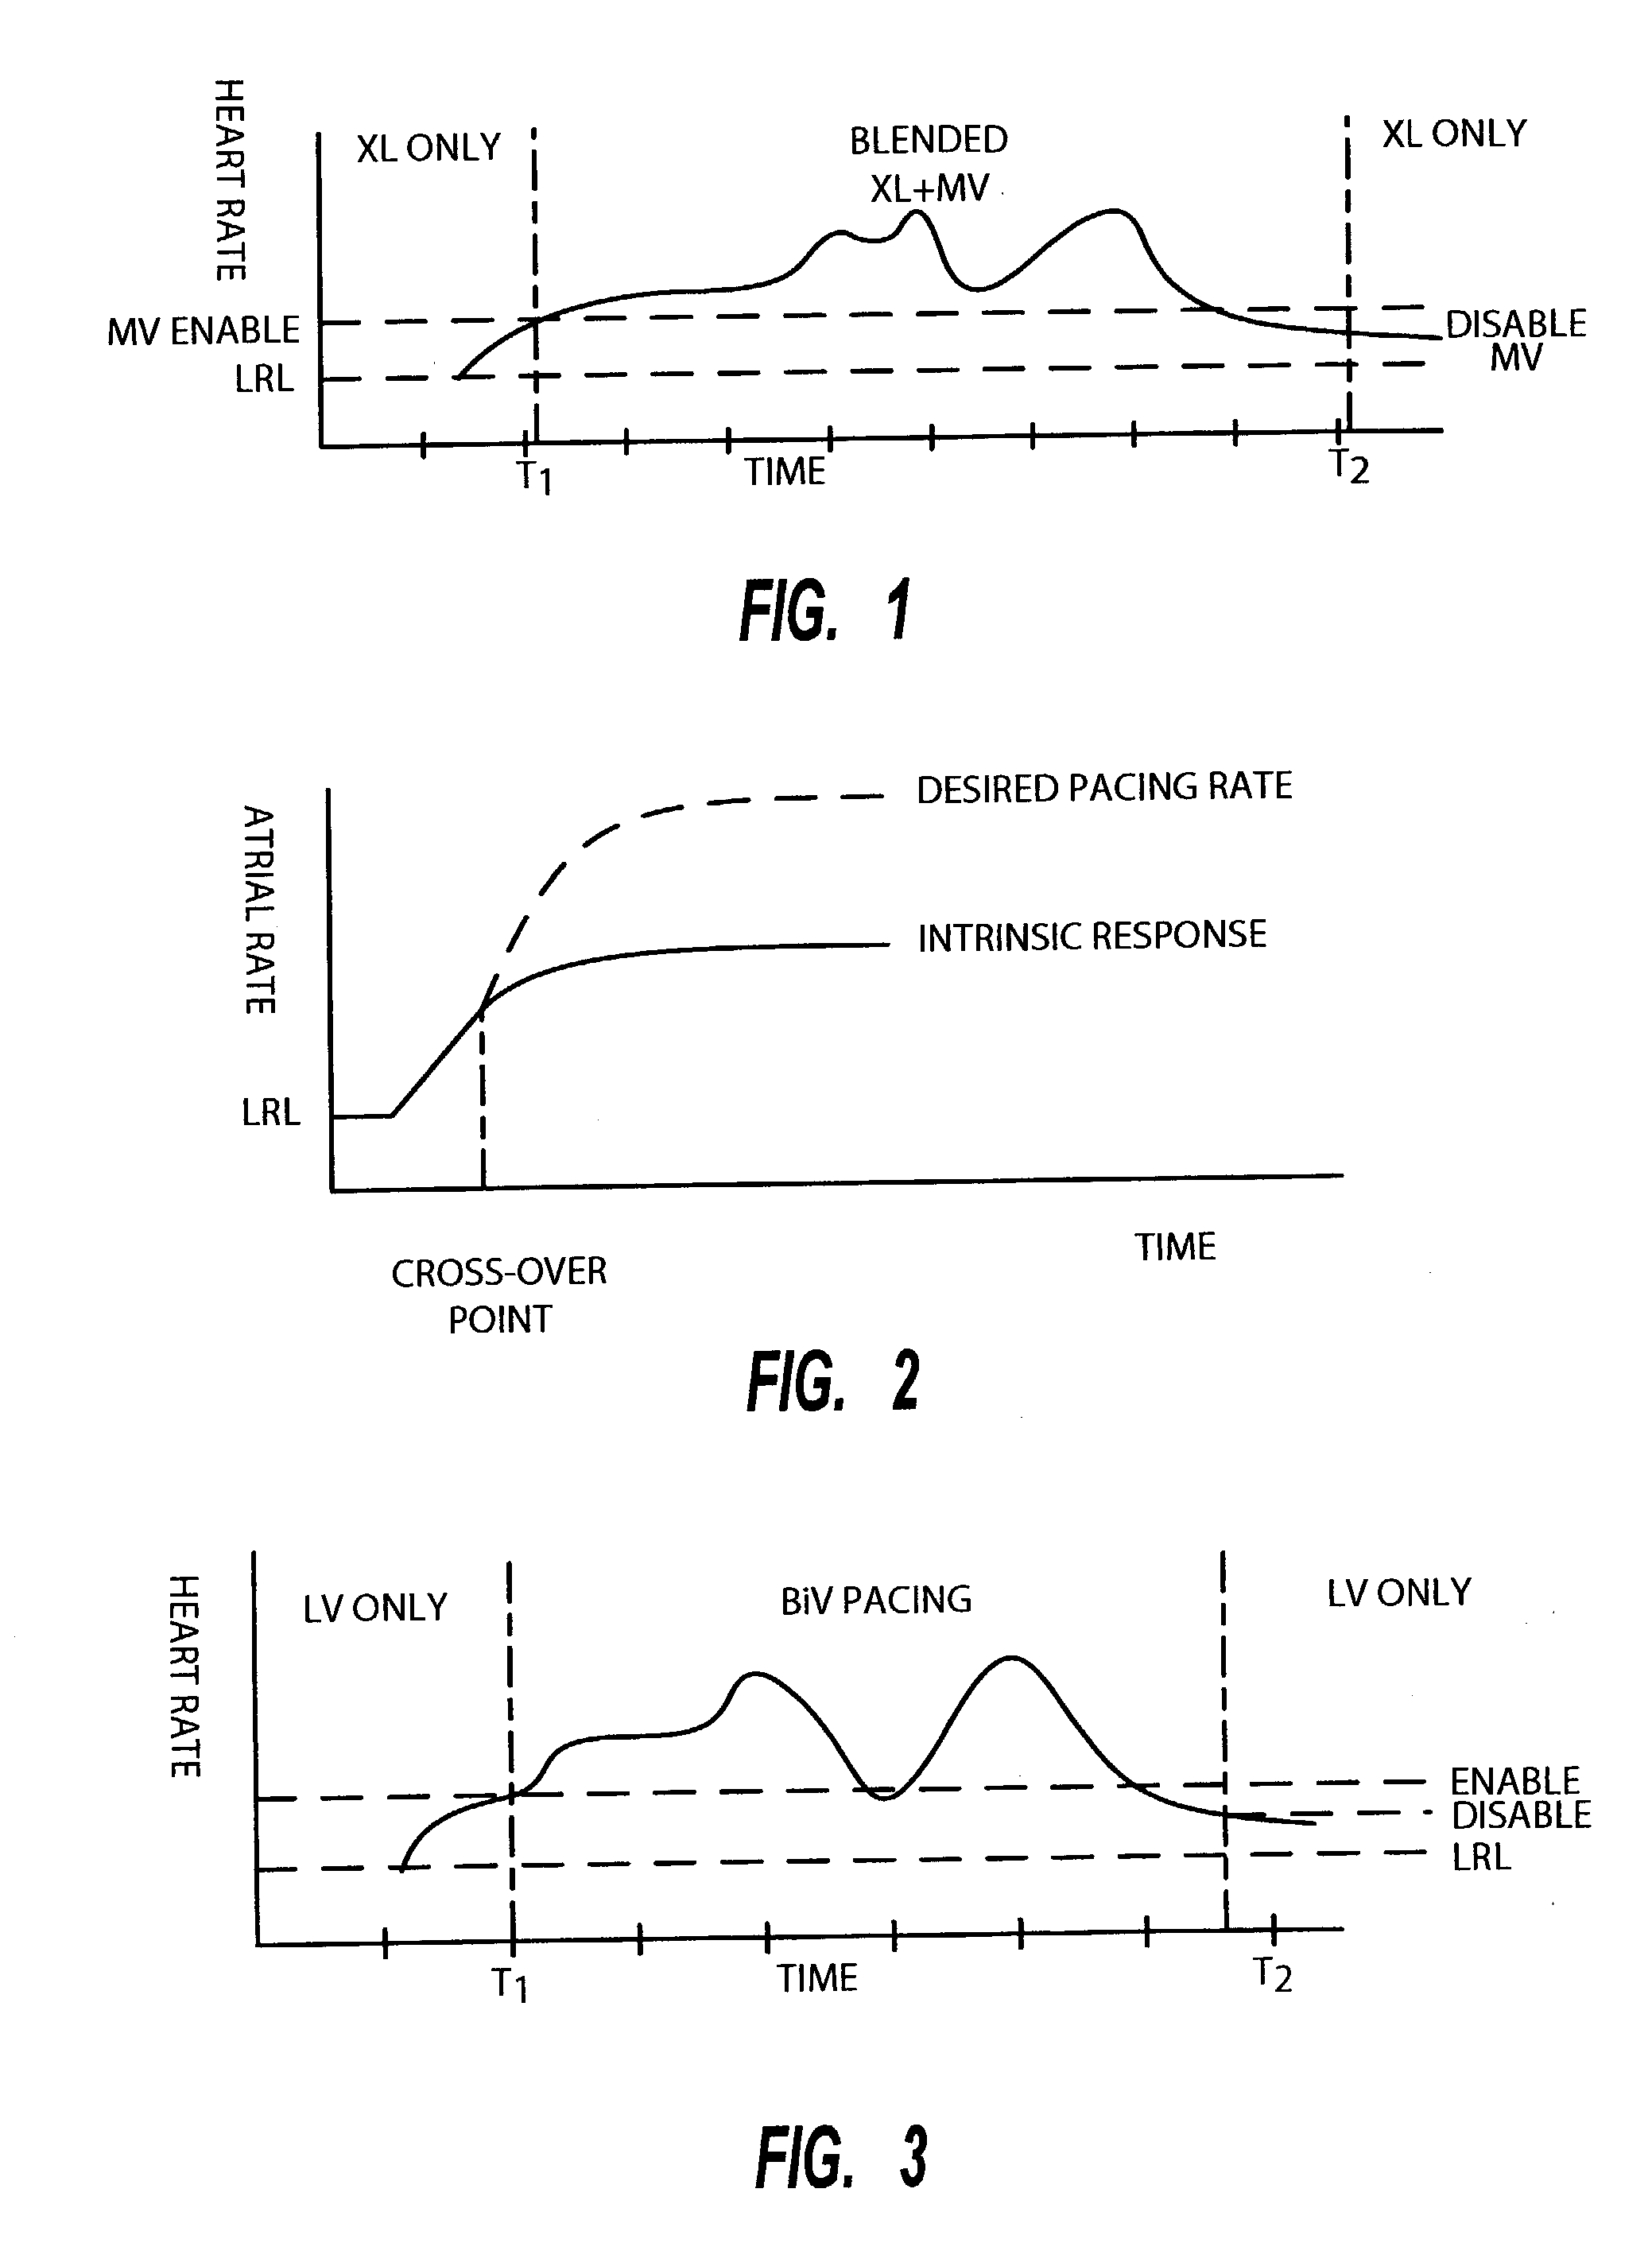 Method of operating implantable medical devices to prolong battery life